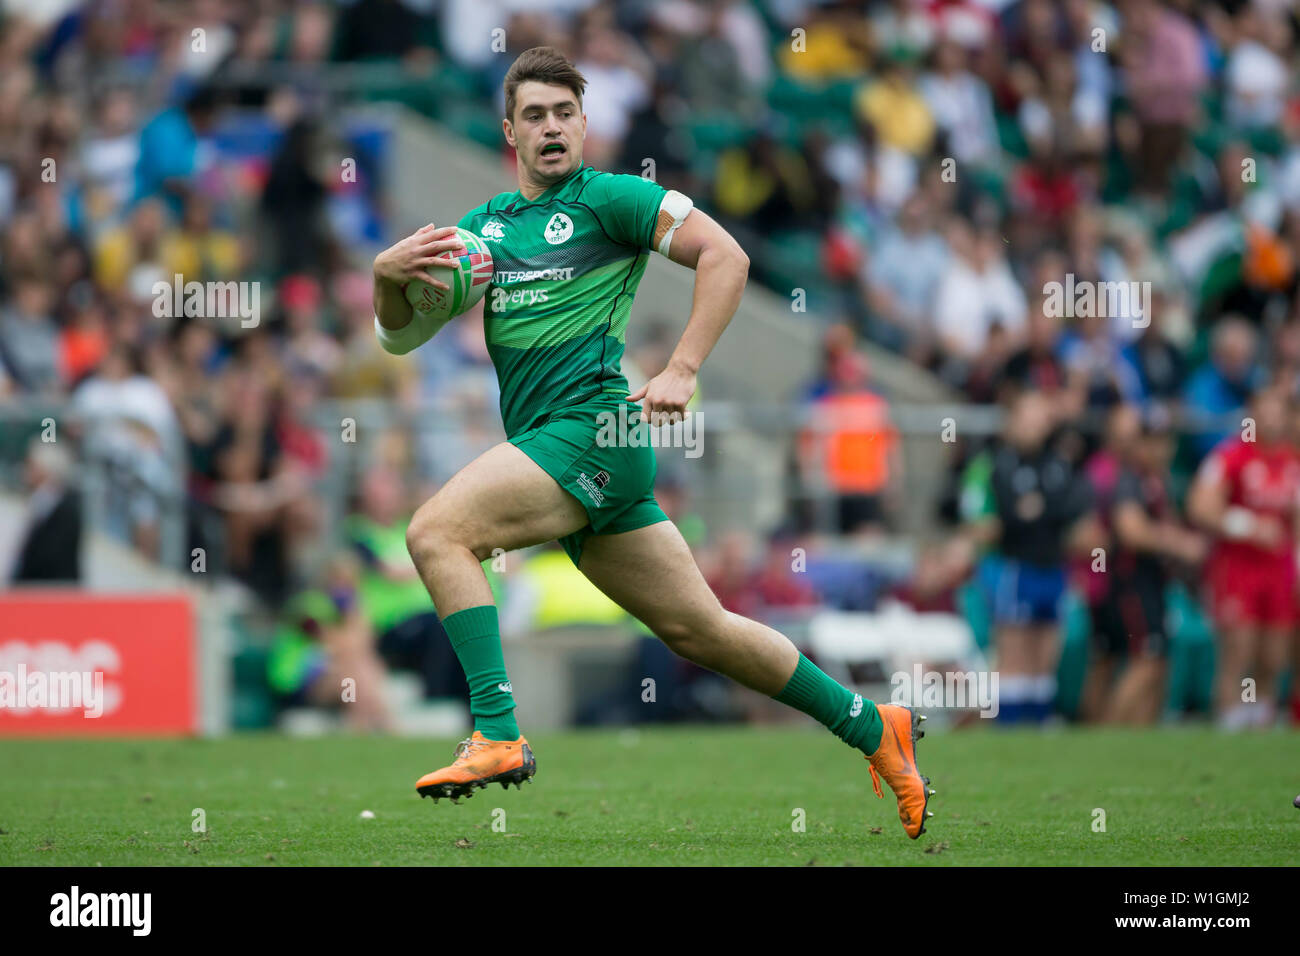 26 May 2019, Great Britain, London: The penultimate tournament of the HSBC World Rugby Sevens Series on 25 and 26 May 2019 in London (GB). Experiment for Ireland by Bryan Mollen (Ireland, 12). Photo: Jürgen Kessler/dpa Stock Photo